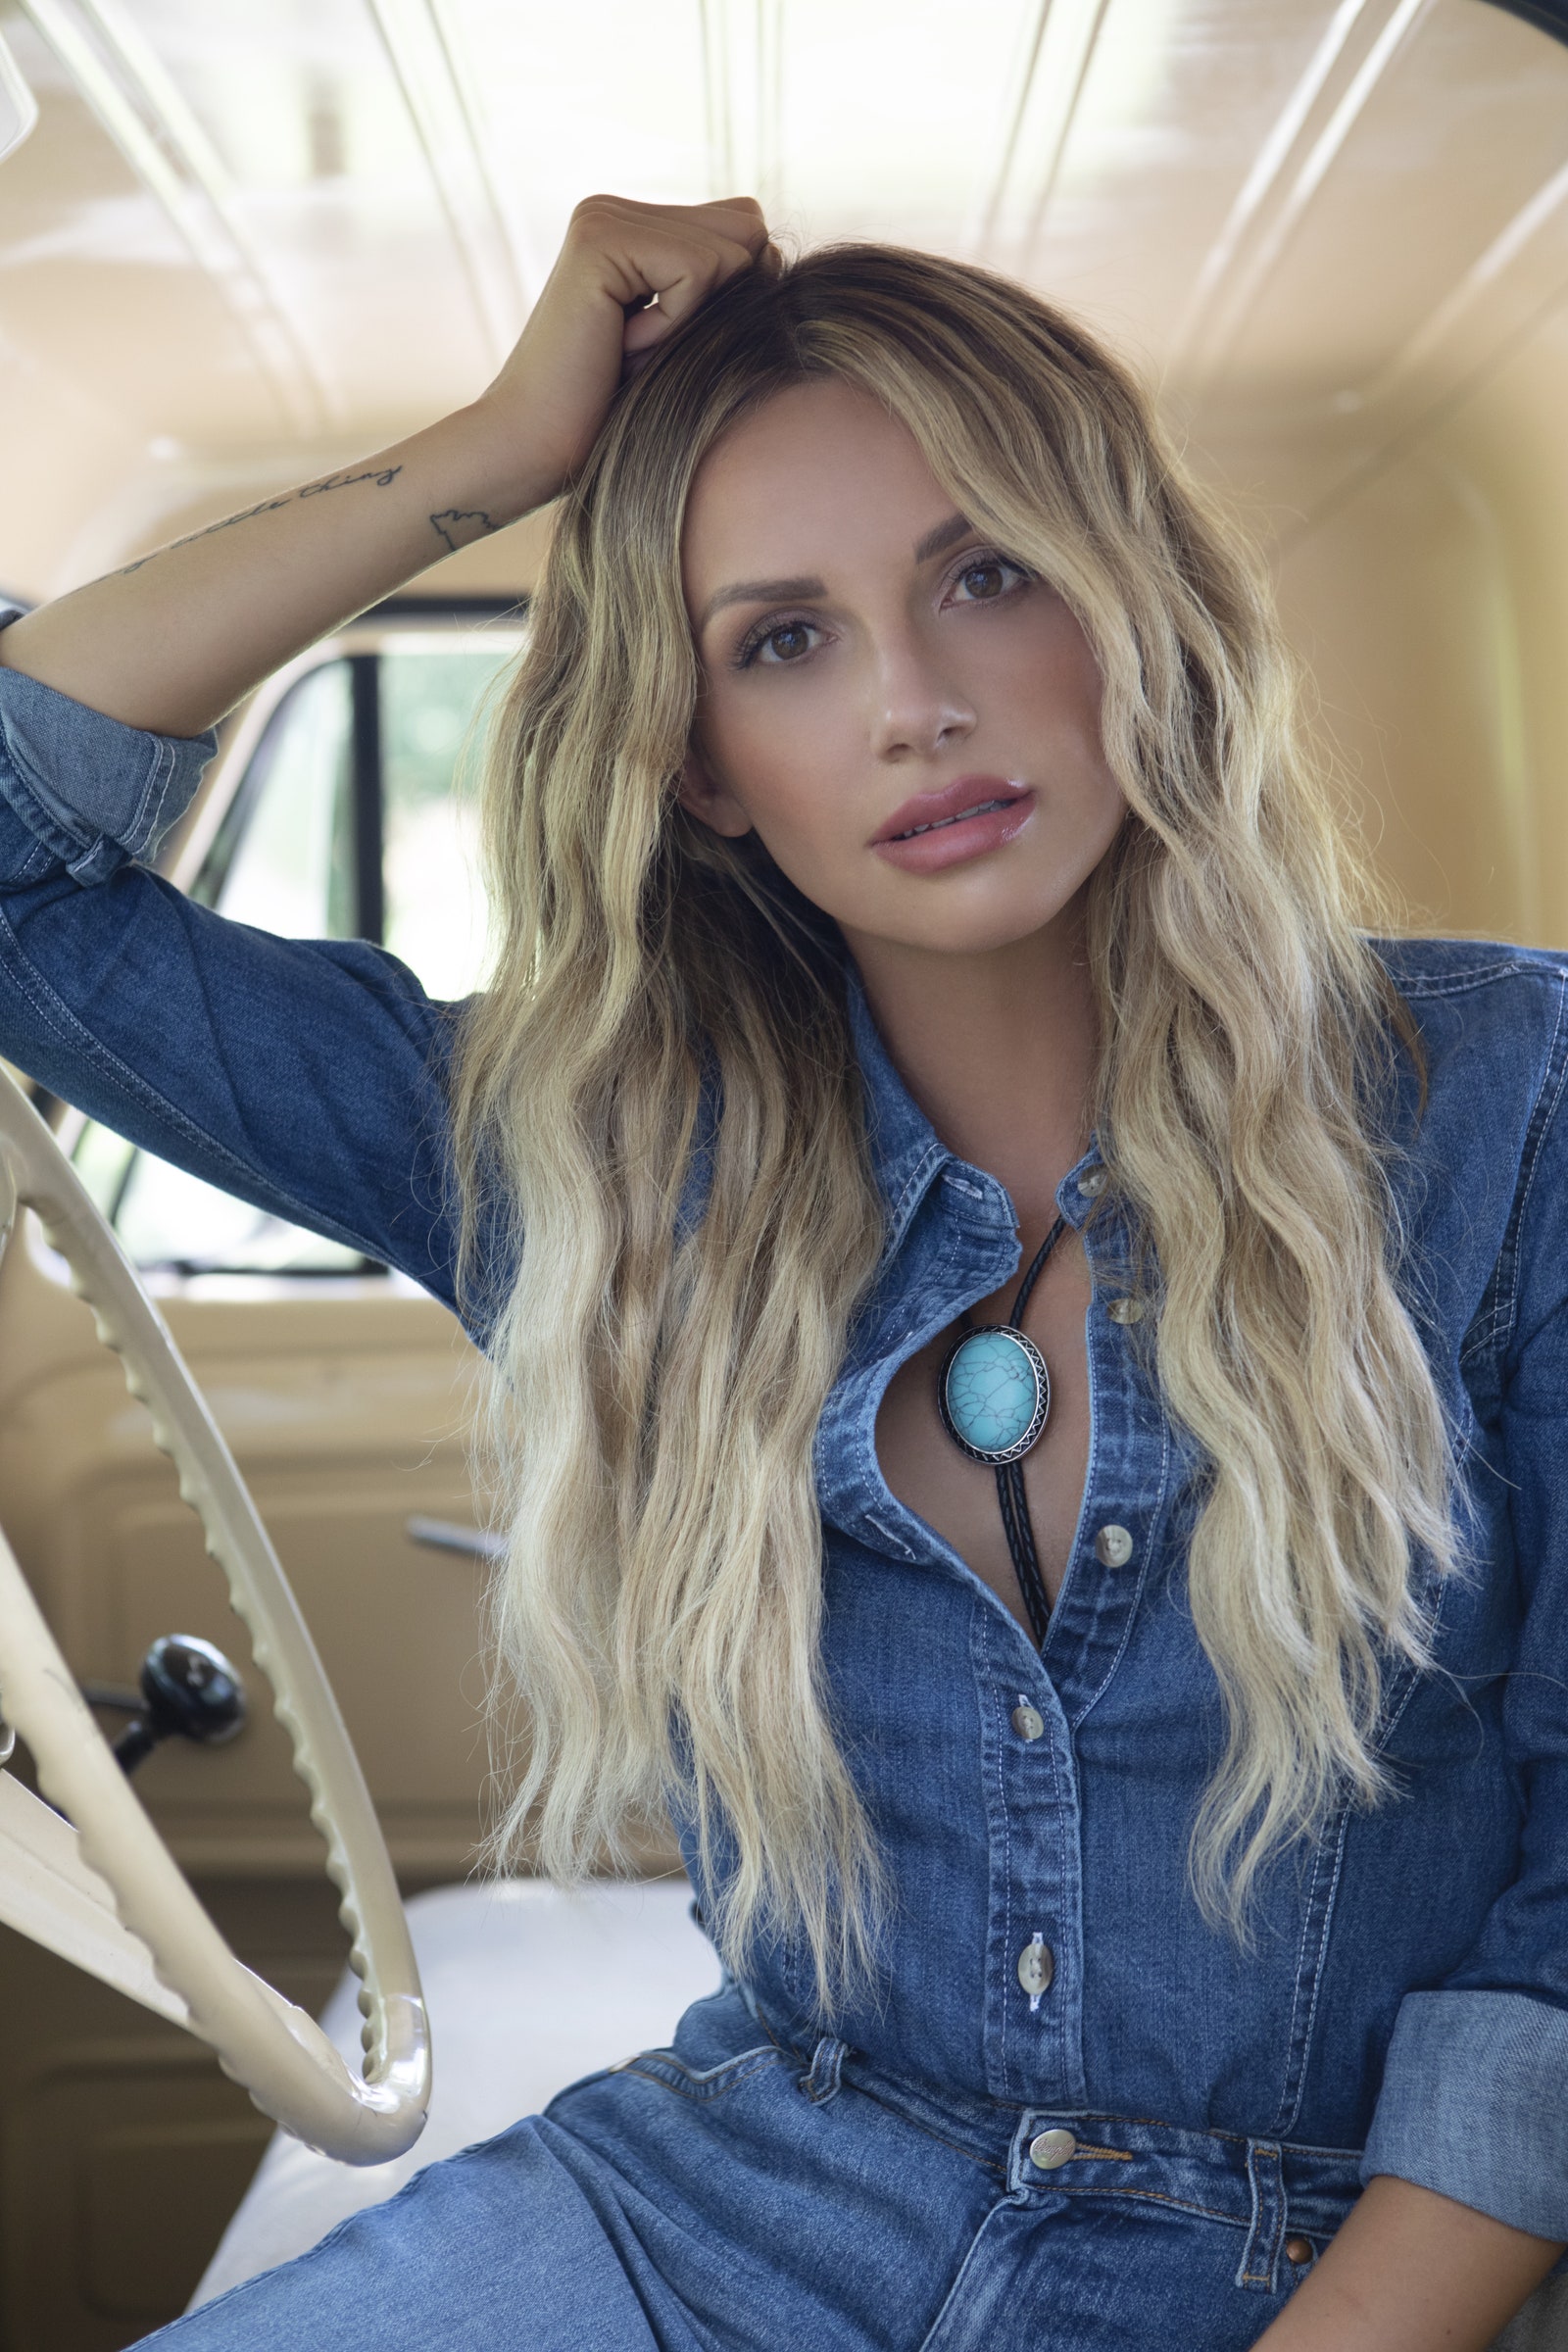 Carly Pearce Has A Life Changing Beauty Secret Weapon That's Available At Any Drugstore